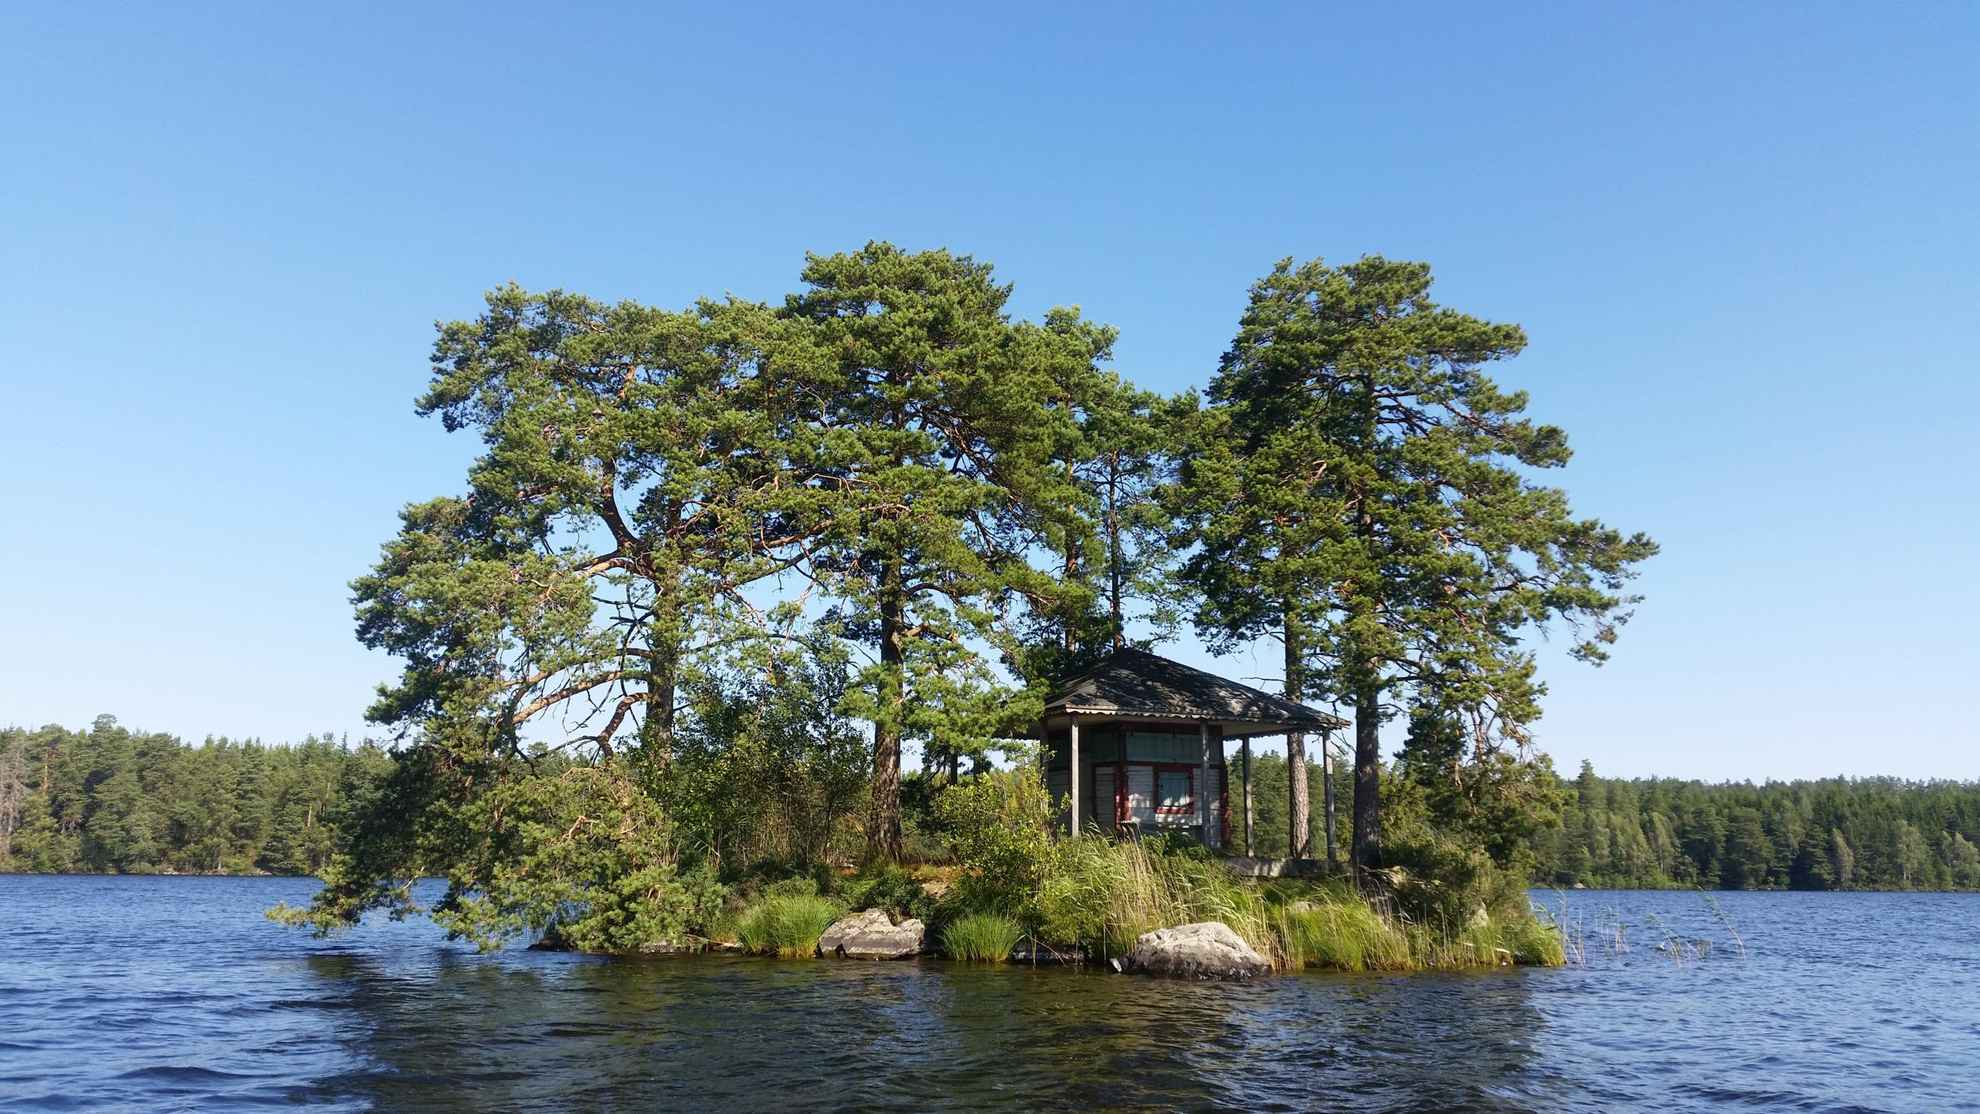 A very small island with a house and a few trees.